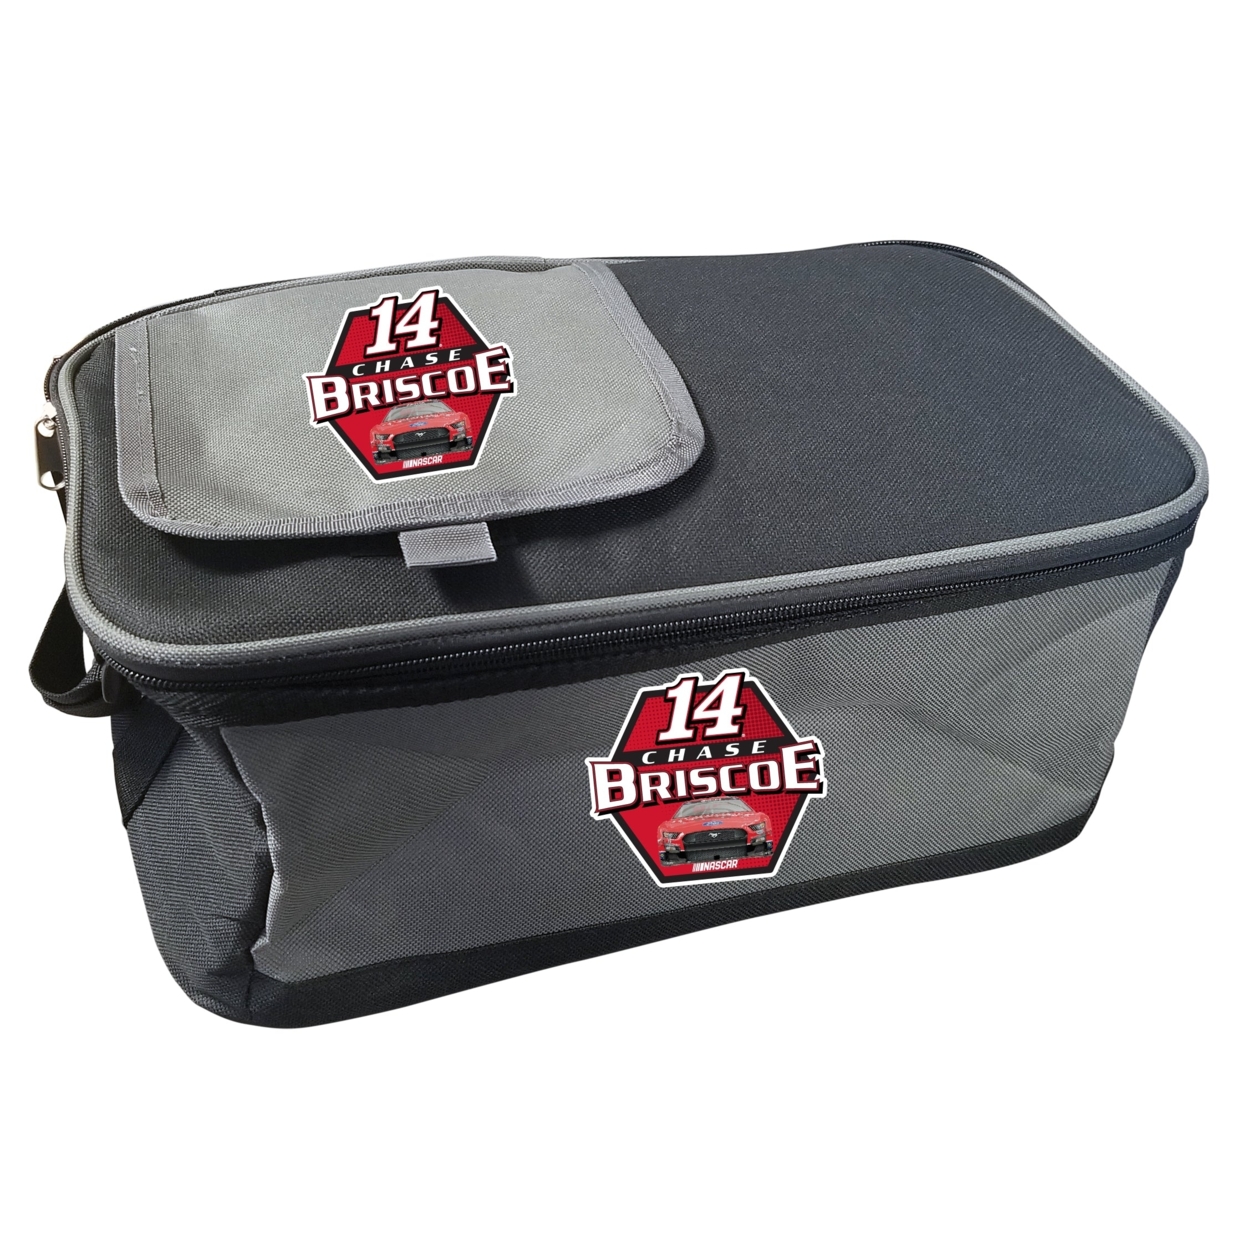 #14 Chase Briscoe Officially Licensed 9 Pack Cooler